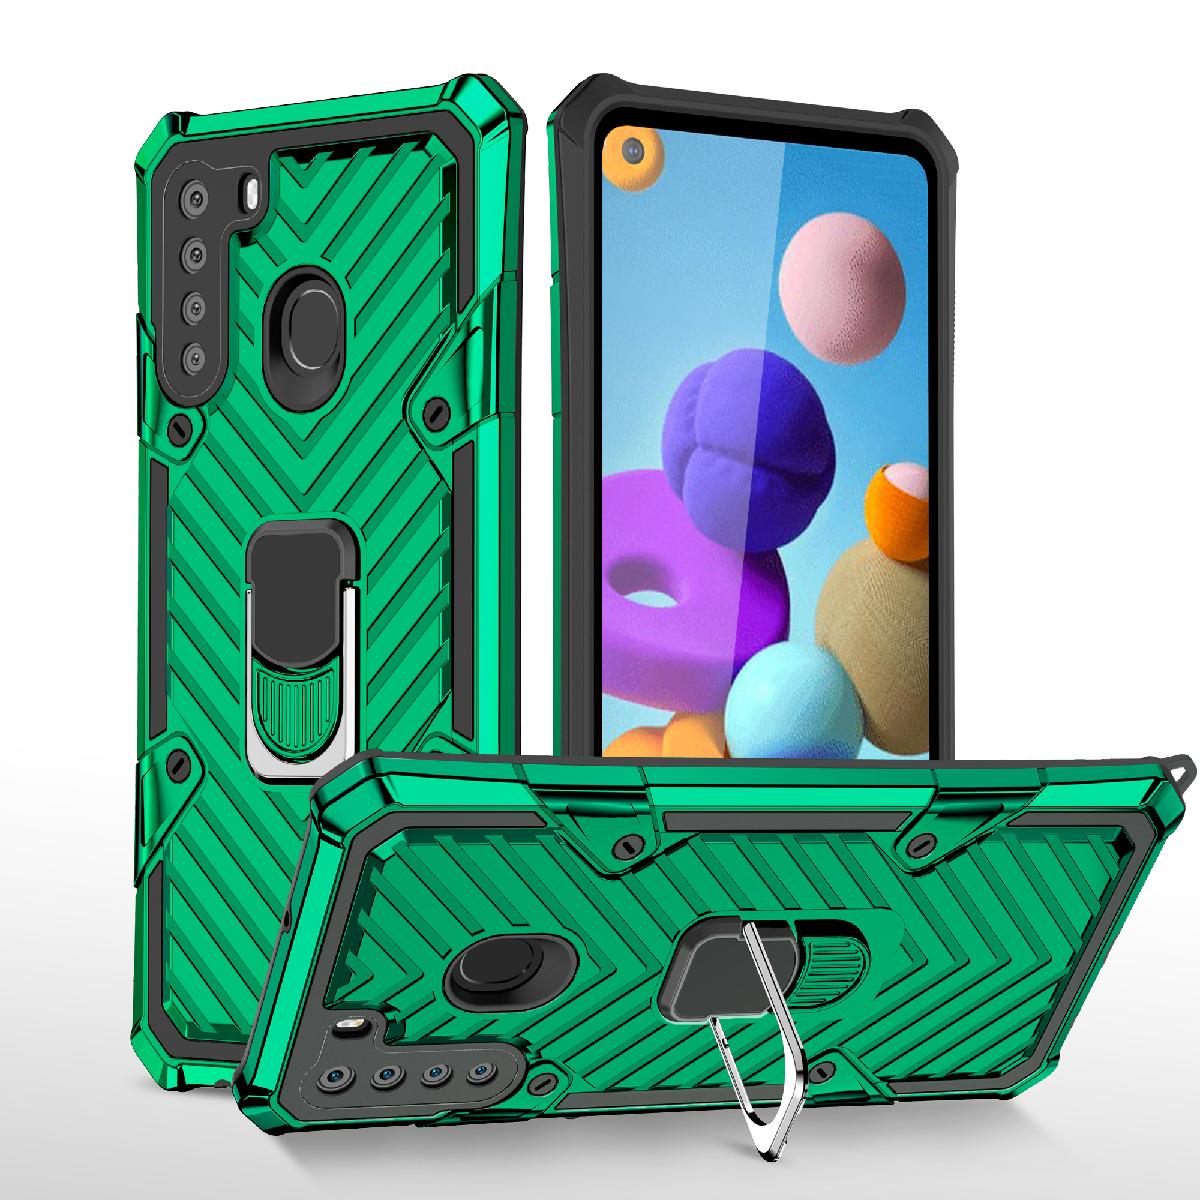 Kickstand Anti-Shock And Anti Falling Case for SAMSUNG GALAXY A21 In Green